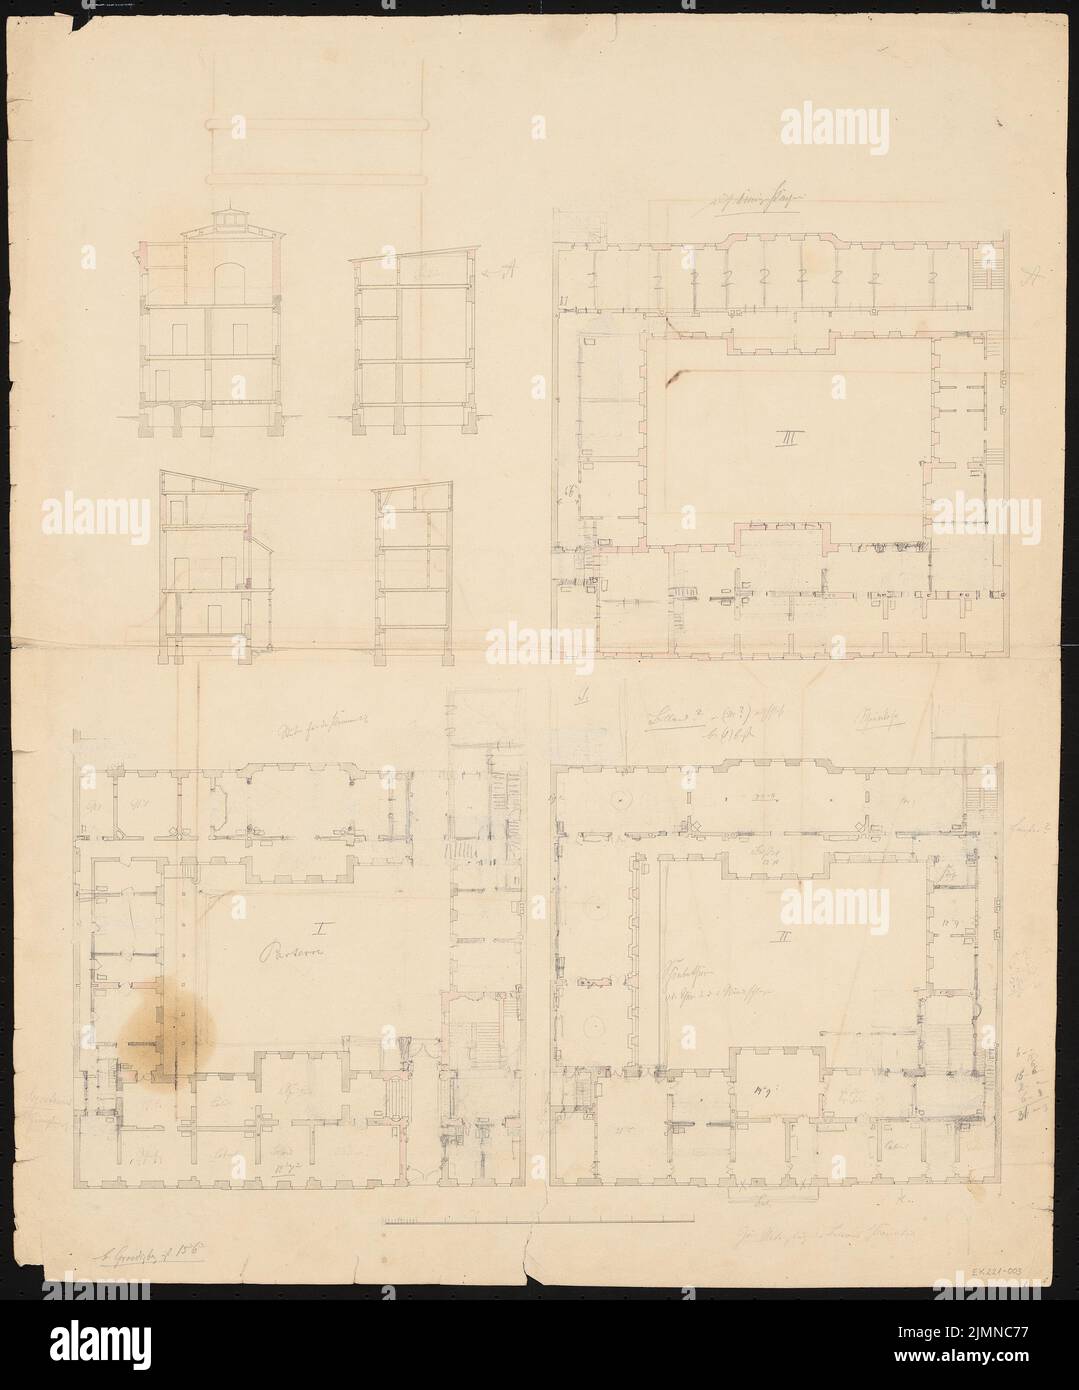 Knoblauch Eduard (1801-1865), Russian embassy, Berlin (1840-1841): floor plan 1st-3rd floor with the cross sections of all wings located around the first courtyard; [Verso] Details of a pillar. Tusche watercolor on paper, supplemented with pencil, 72.6 x 60.3 cm (including scan edges) Stock Photo